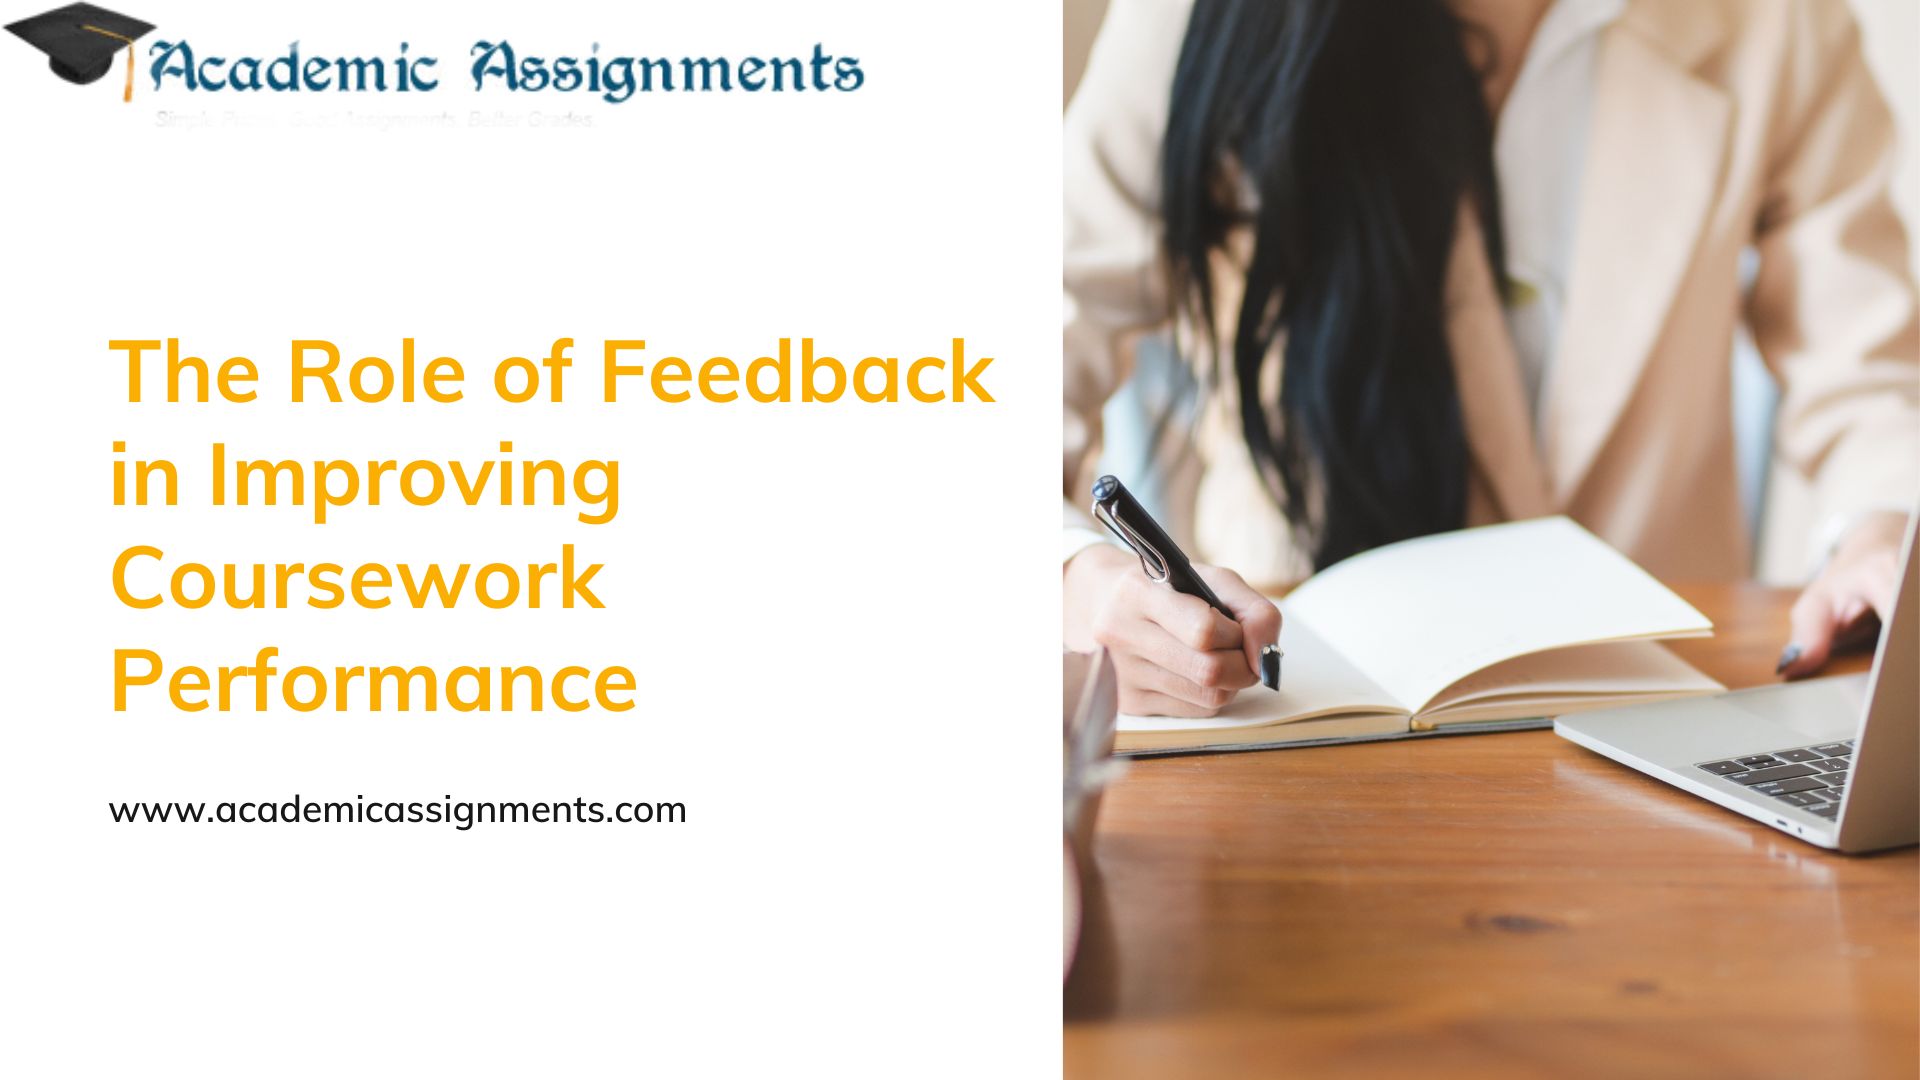 The Role of Feedback in Improving Coursework Performance